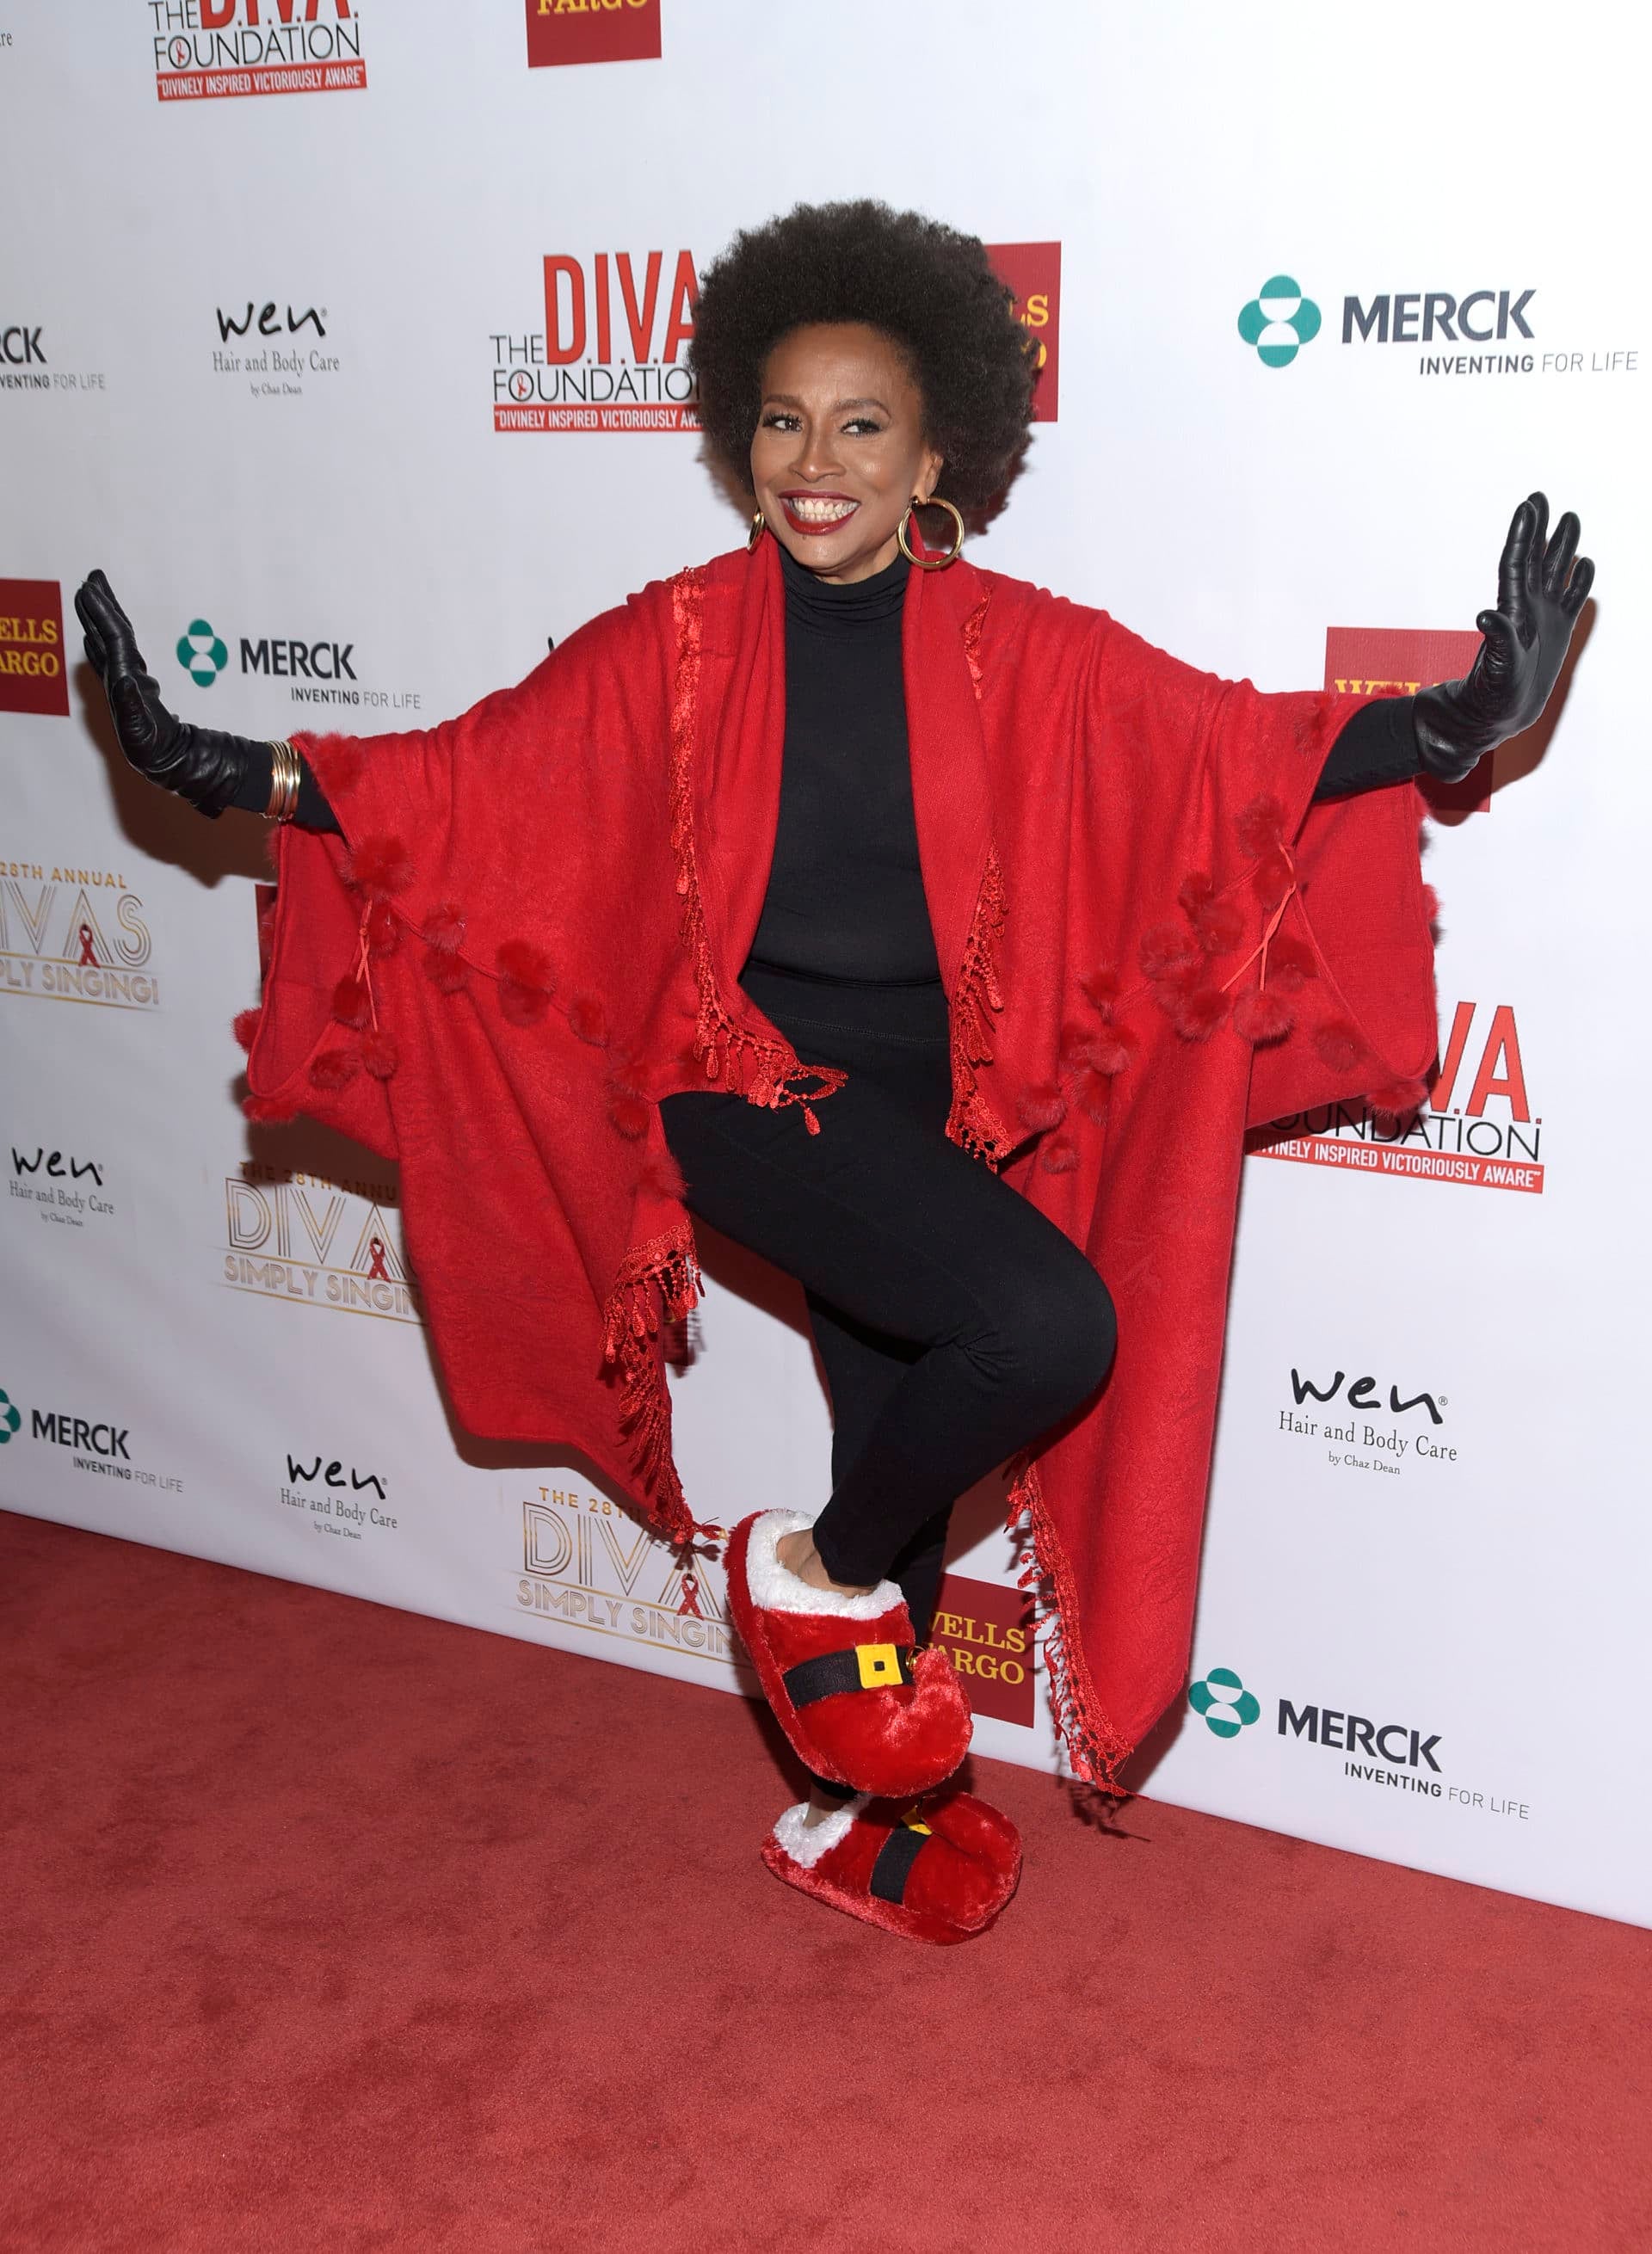 Janelle Monáe, Angela Bassett, Lenny Kravitz, And More Celebs Out And About